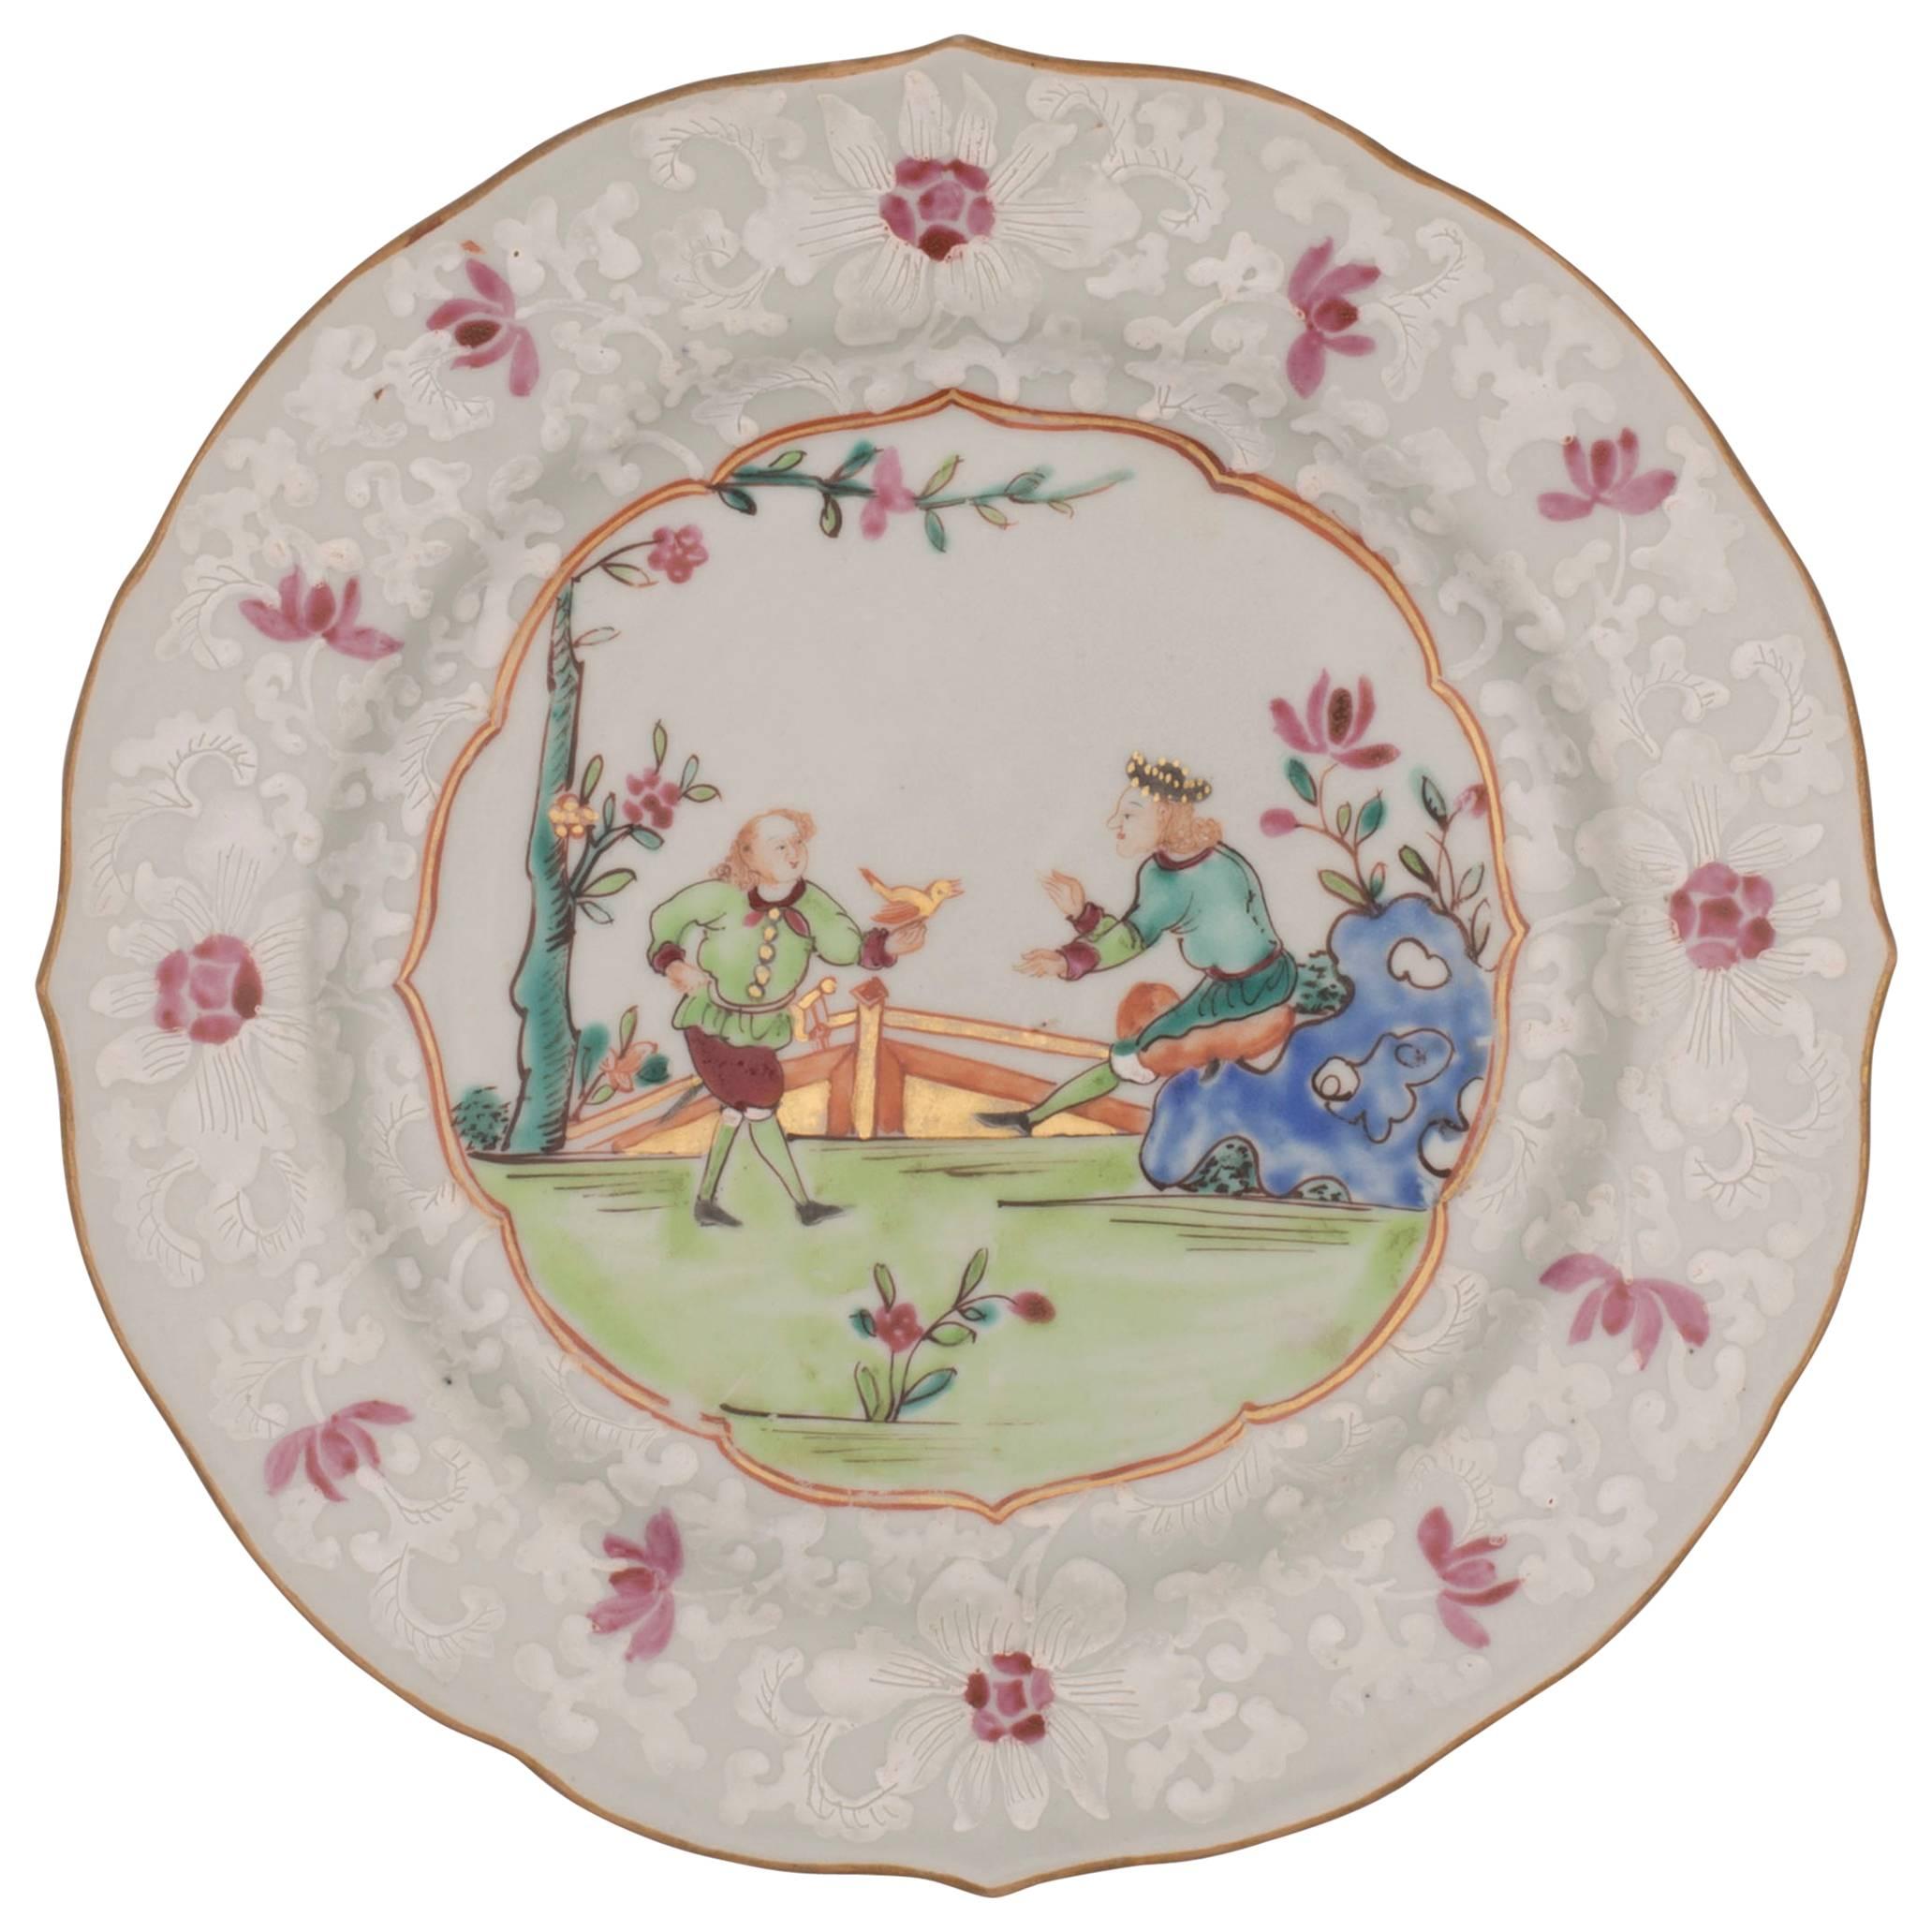 Chinese Porcelain European Subject Famile Rose Plate with Two Men, 18th Century